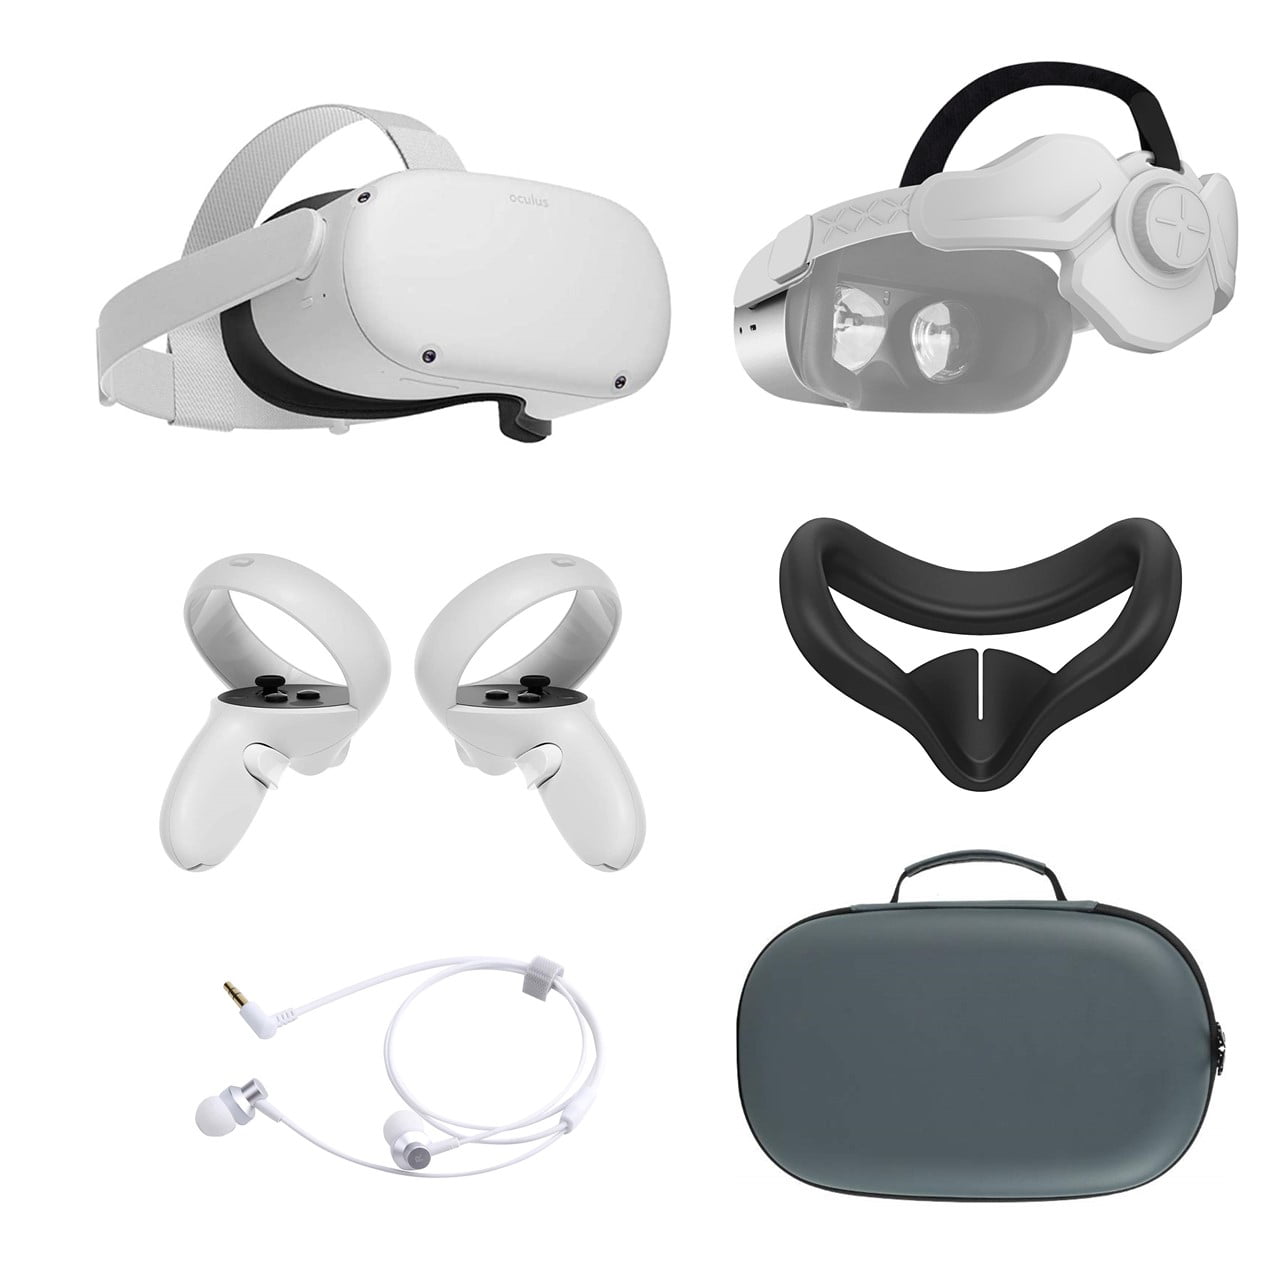 2021 Meta Oculus Quest 2 All-In-One VR Headset, Touch Controllers, 256GB  SSD, 1832x1920 up to 90 Hz Refresh Rate LCD, 3D Audio, Mytrix Head Strap,  